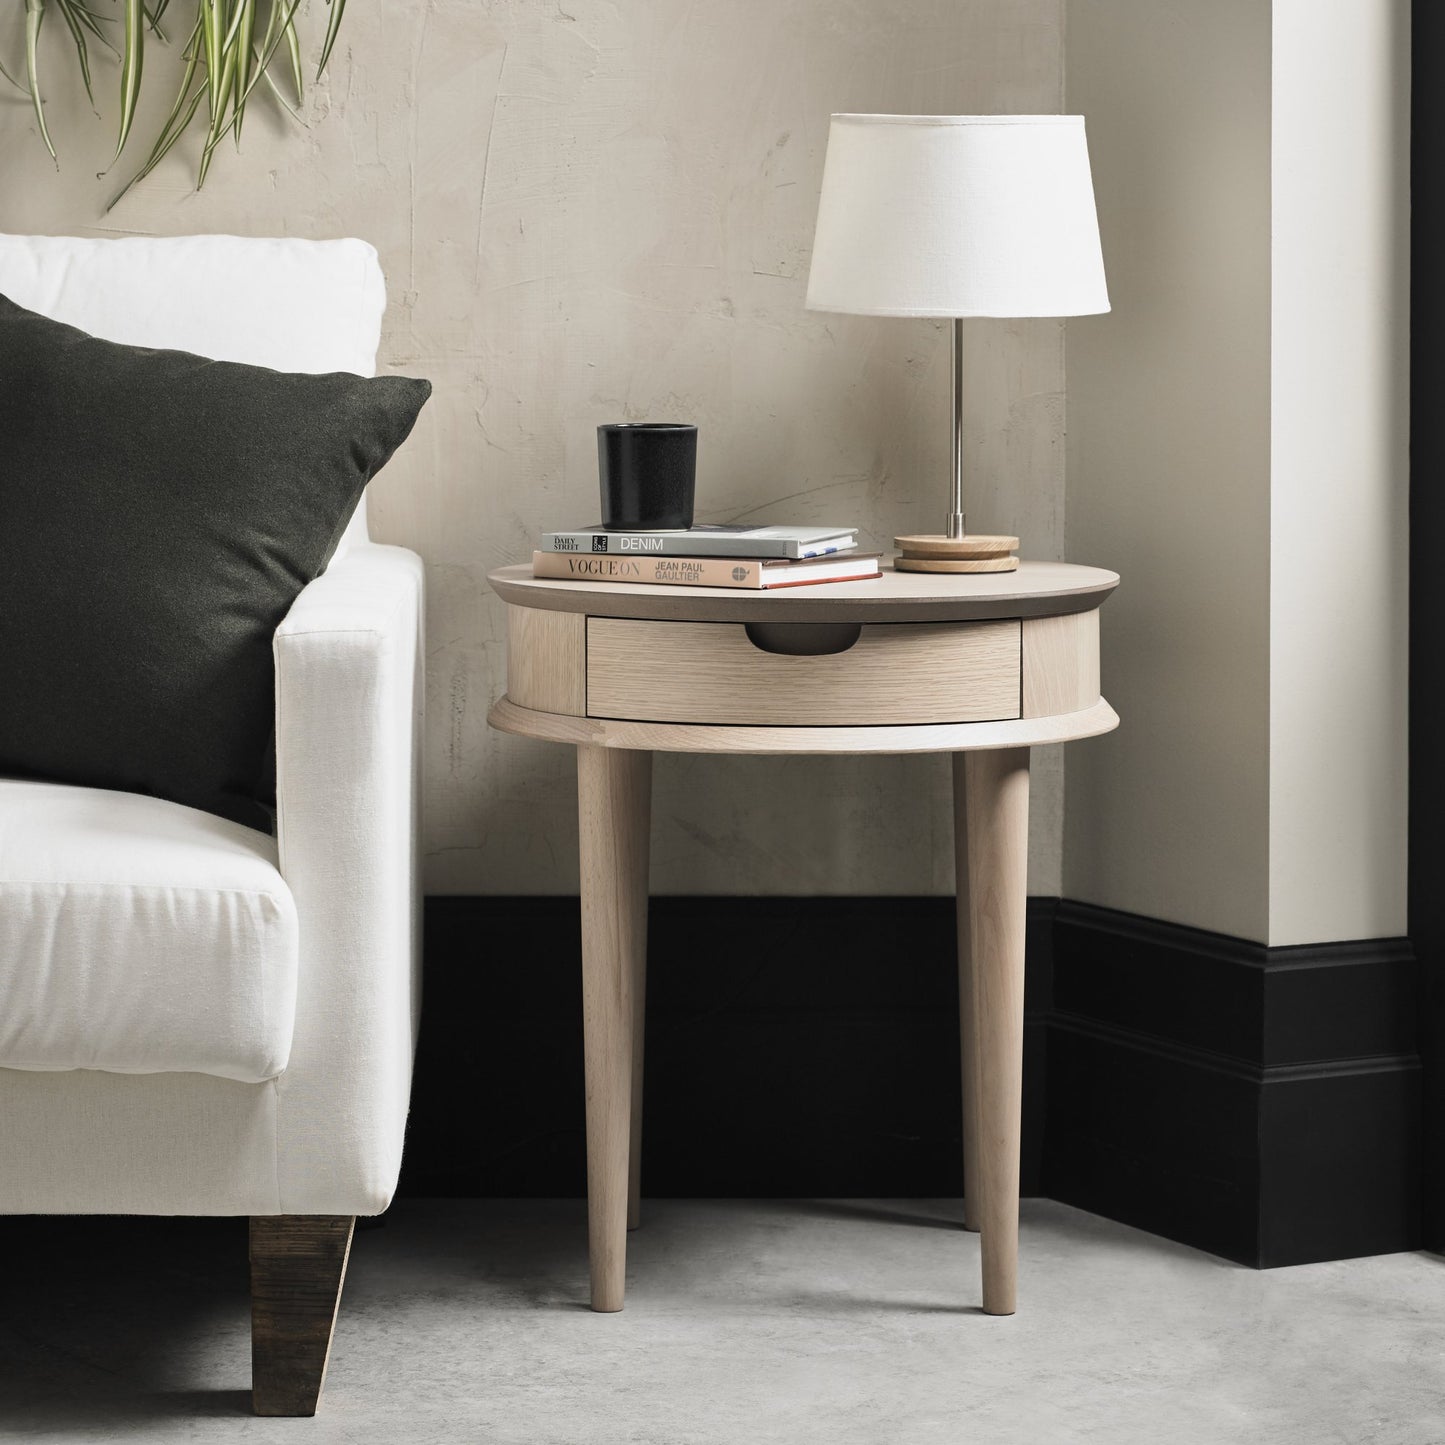 ODENSE LAMP TABLE WITH DRAWER